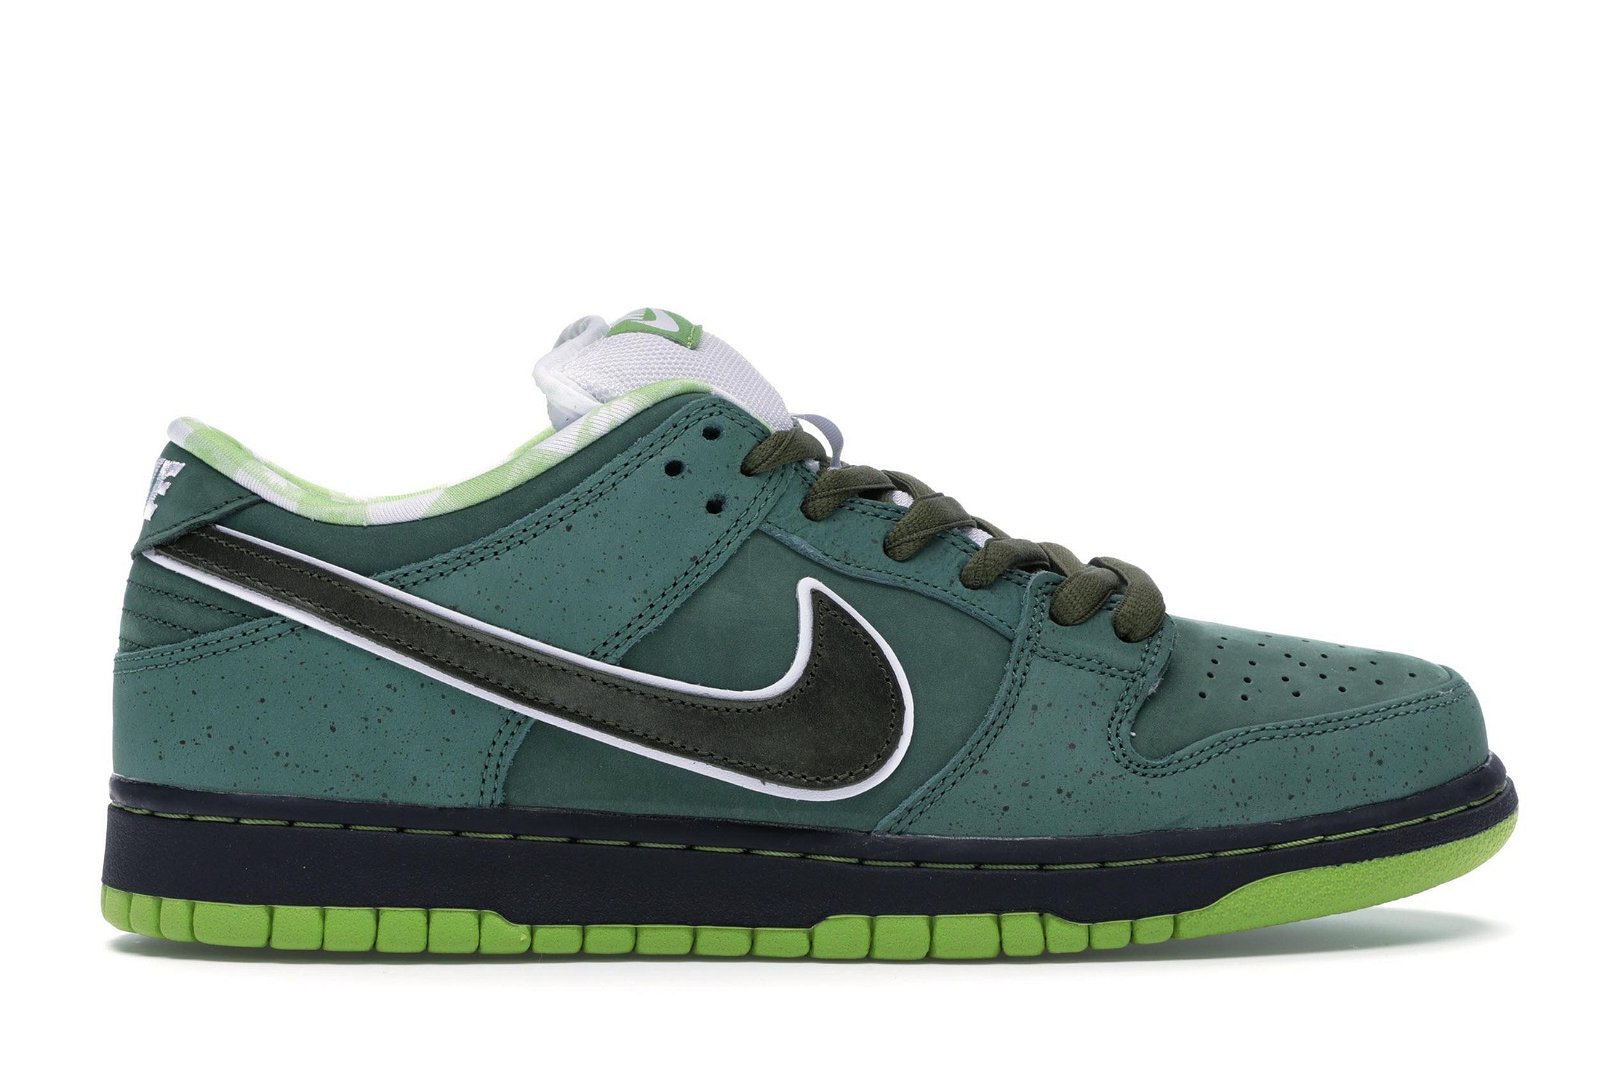 sneakers Nike SB Dunk Low Concepts Green Lobster (Regular Box)